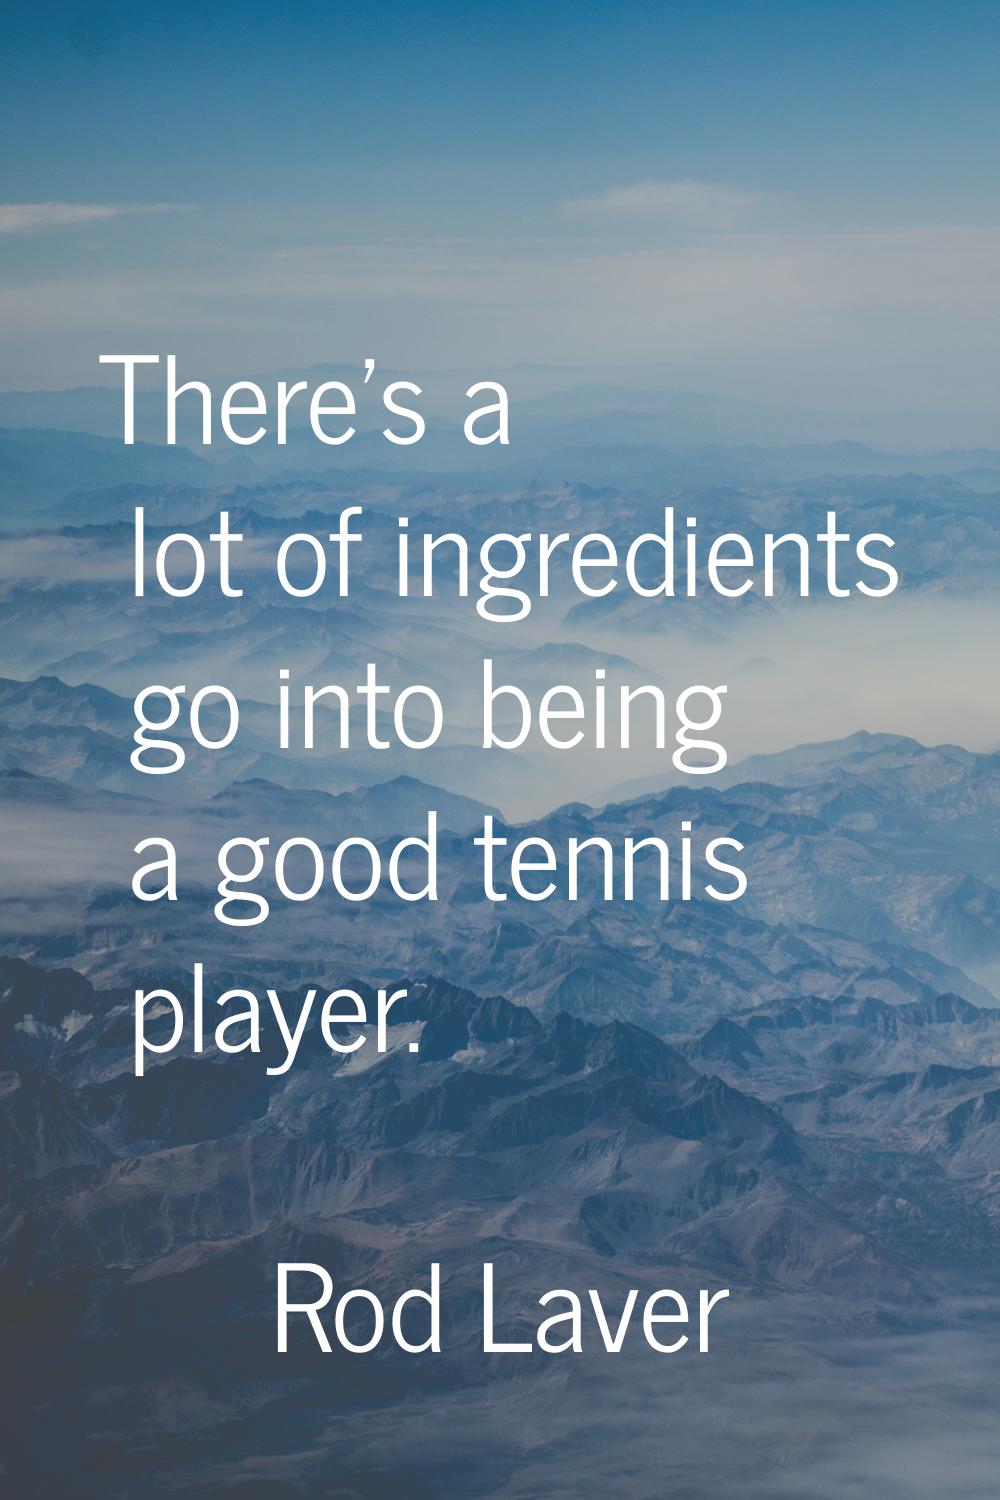 There's a lot of ingredients go into being a good tennis player.